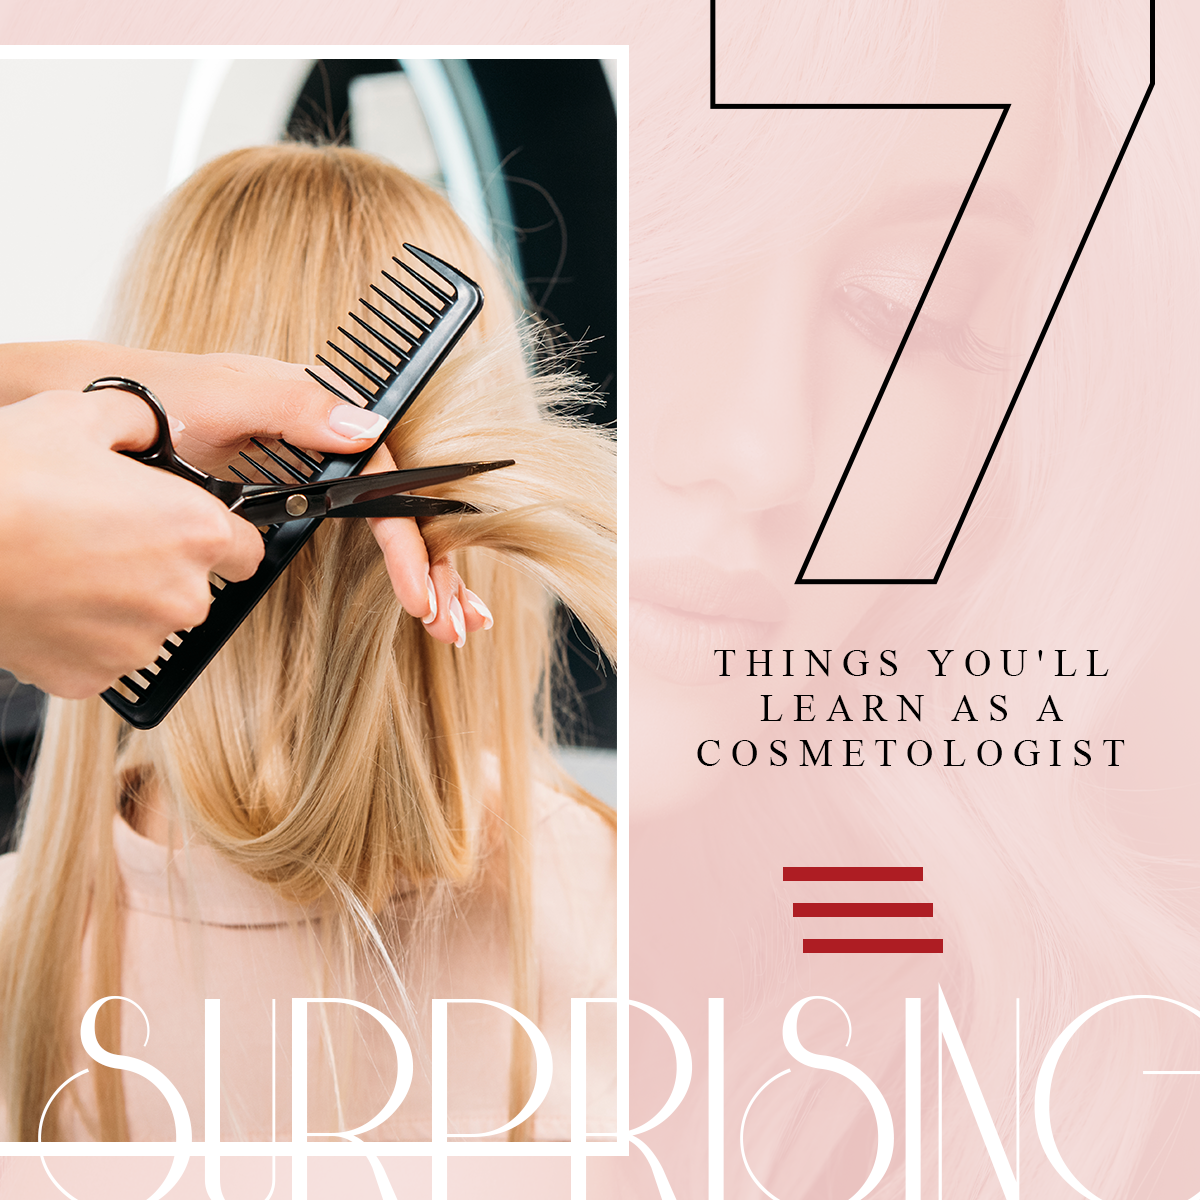 7 Surprising Things You'll Learn as a Cosmetologist